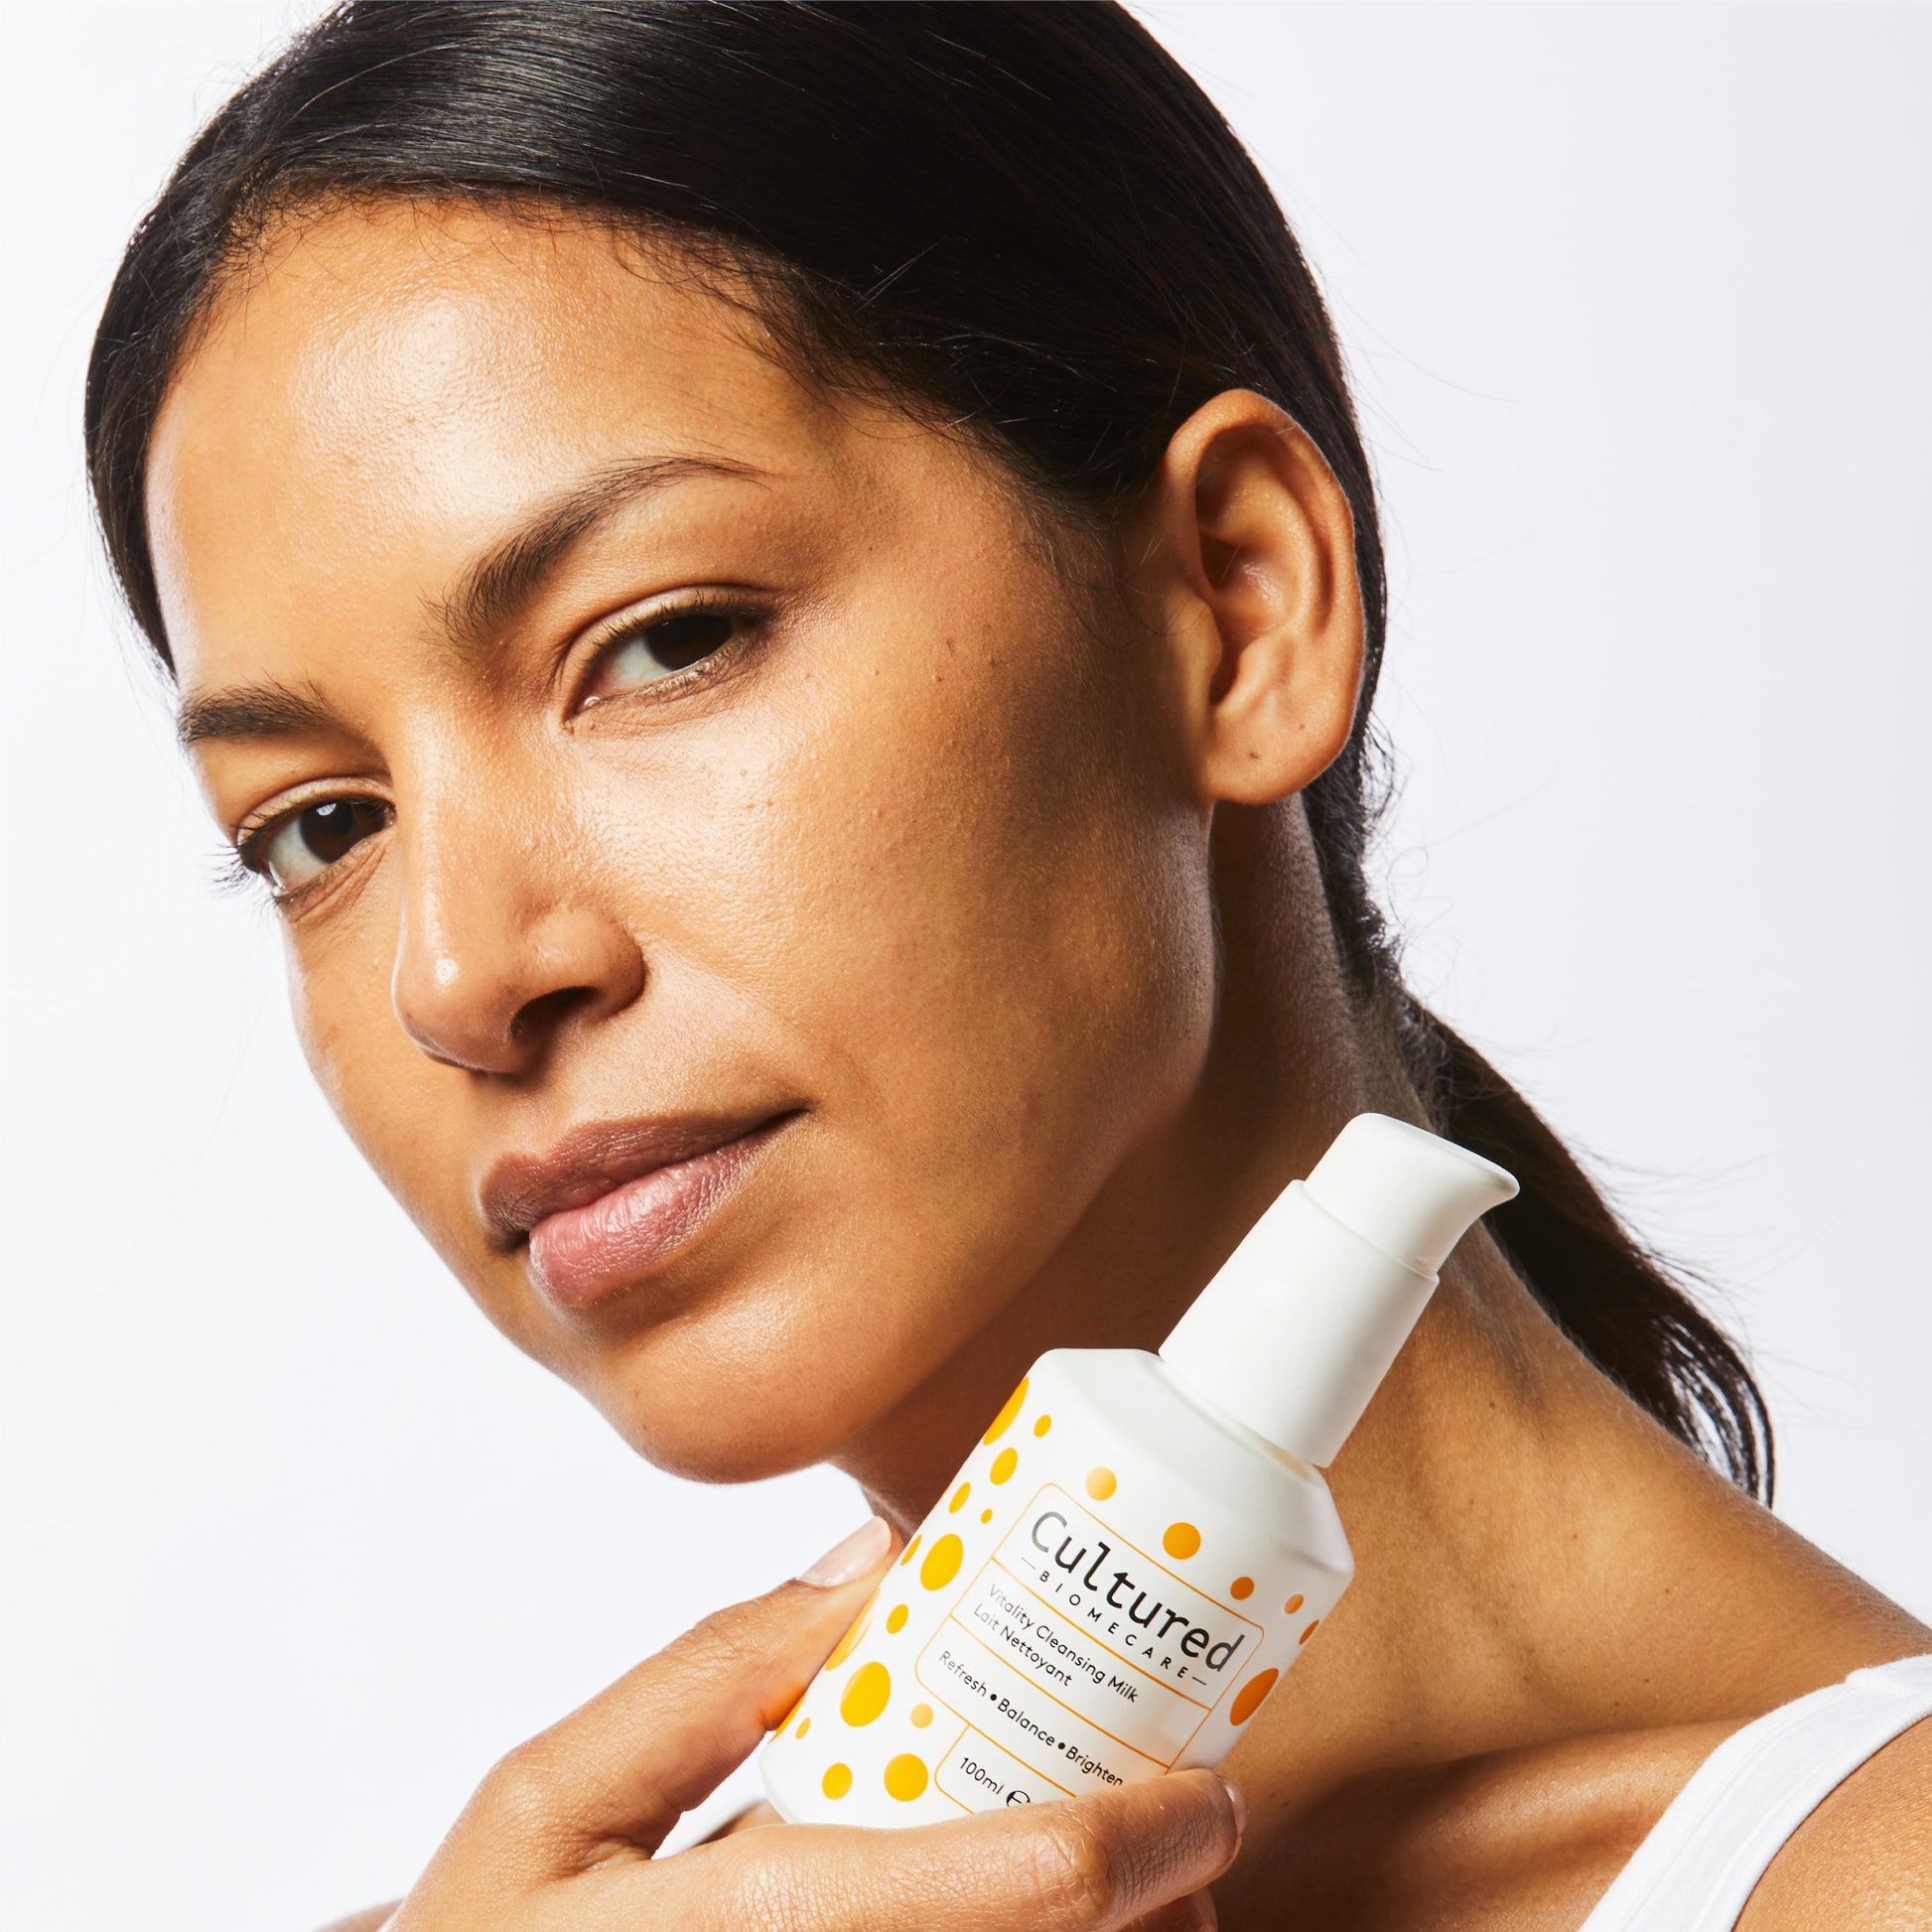 A close up headshot of a model with clear, glowing skin holding the Cleansing Milk up to her face.